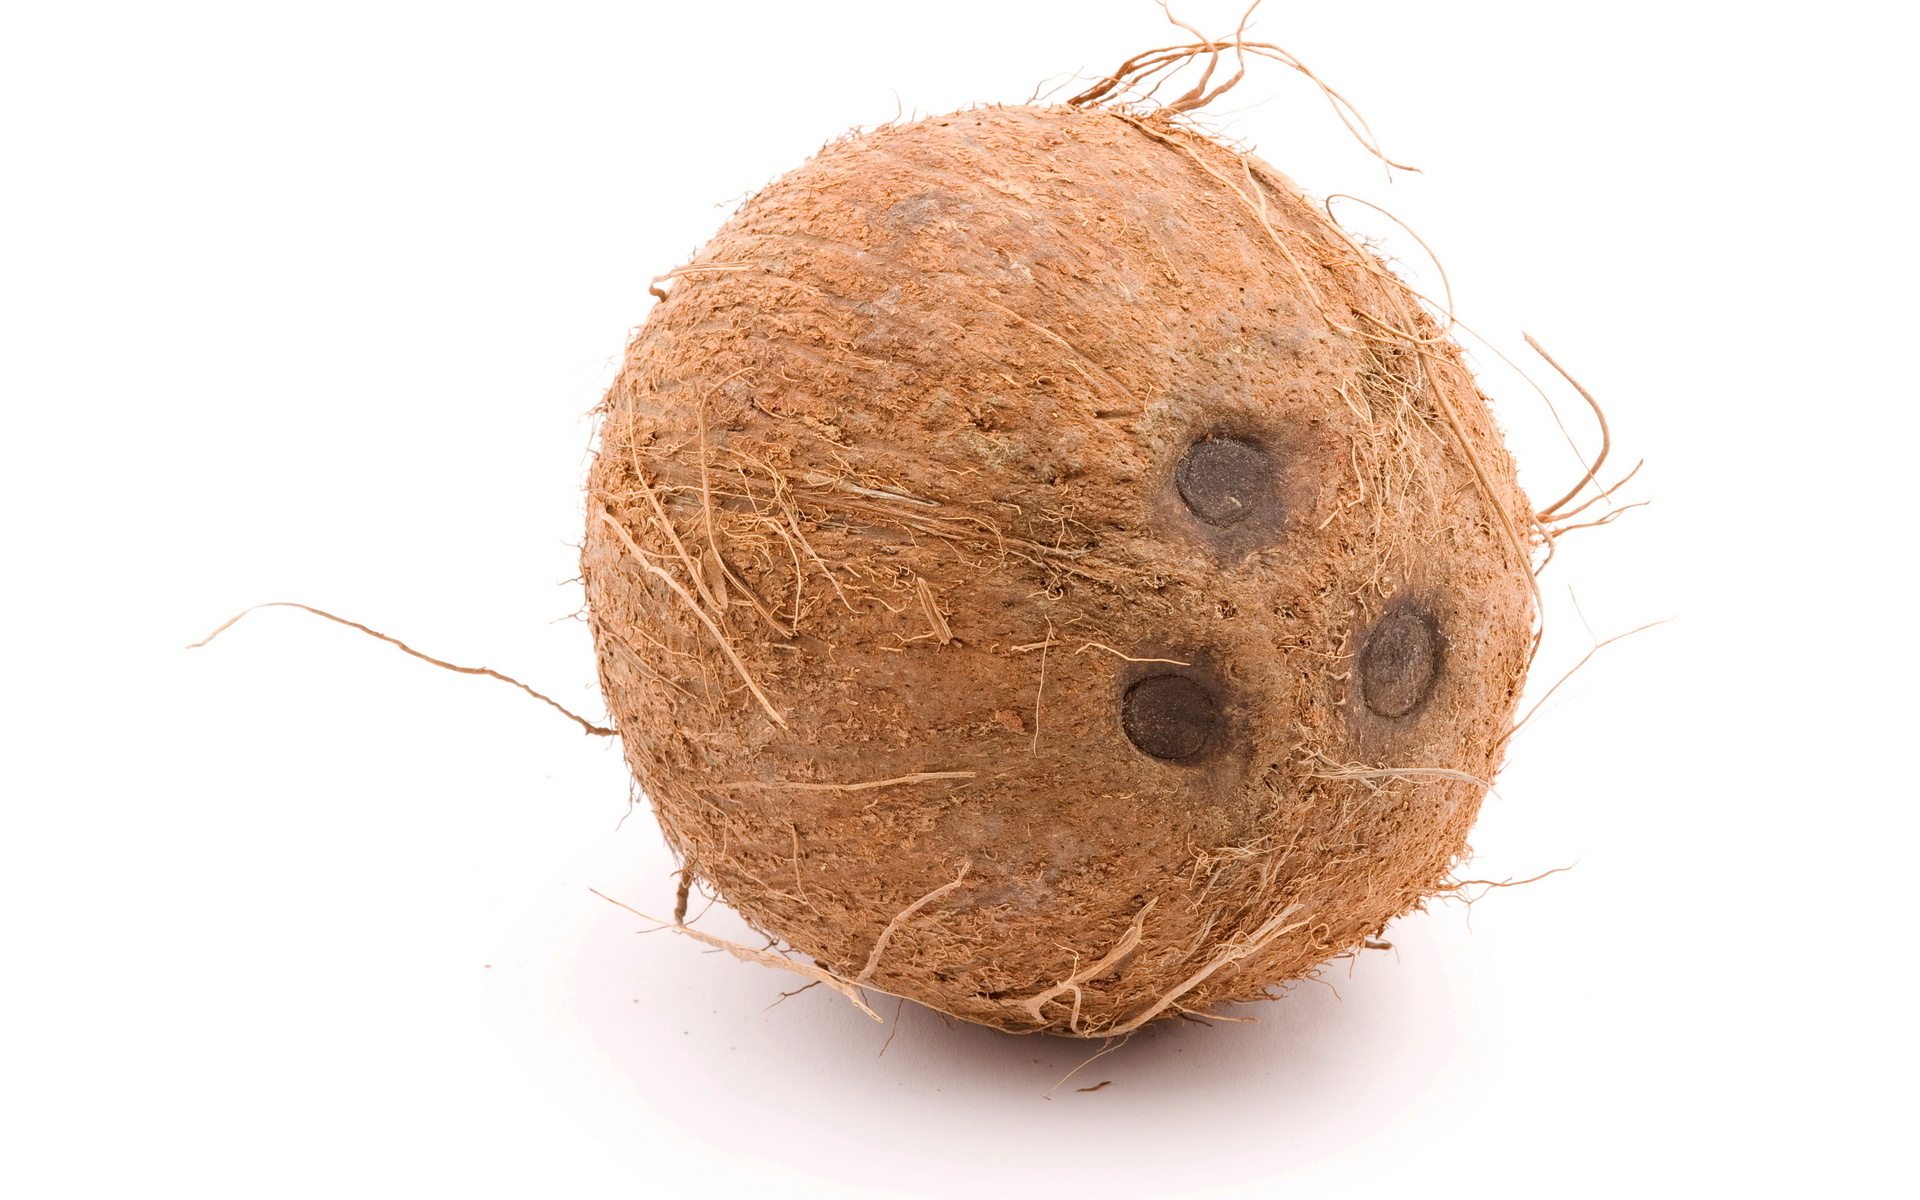 How the coconut got his face